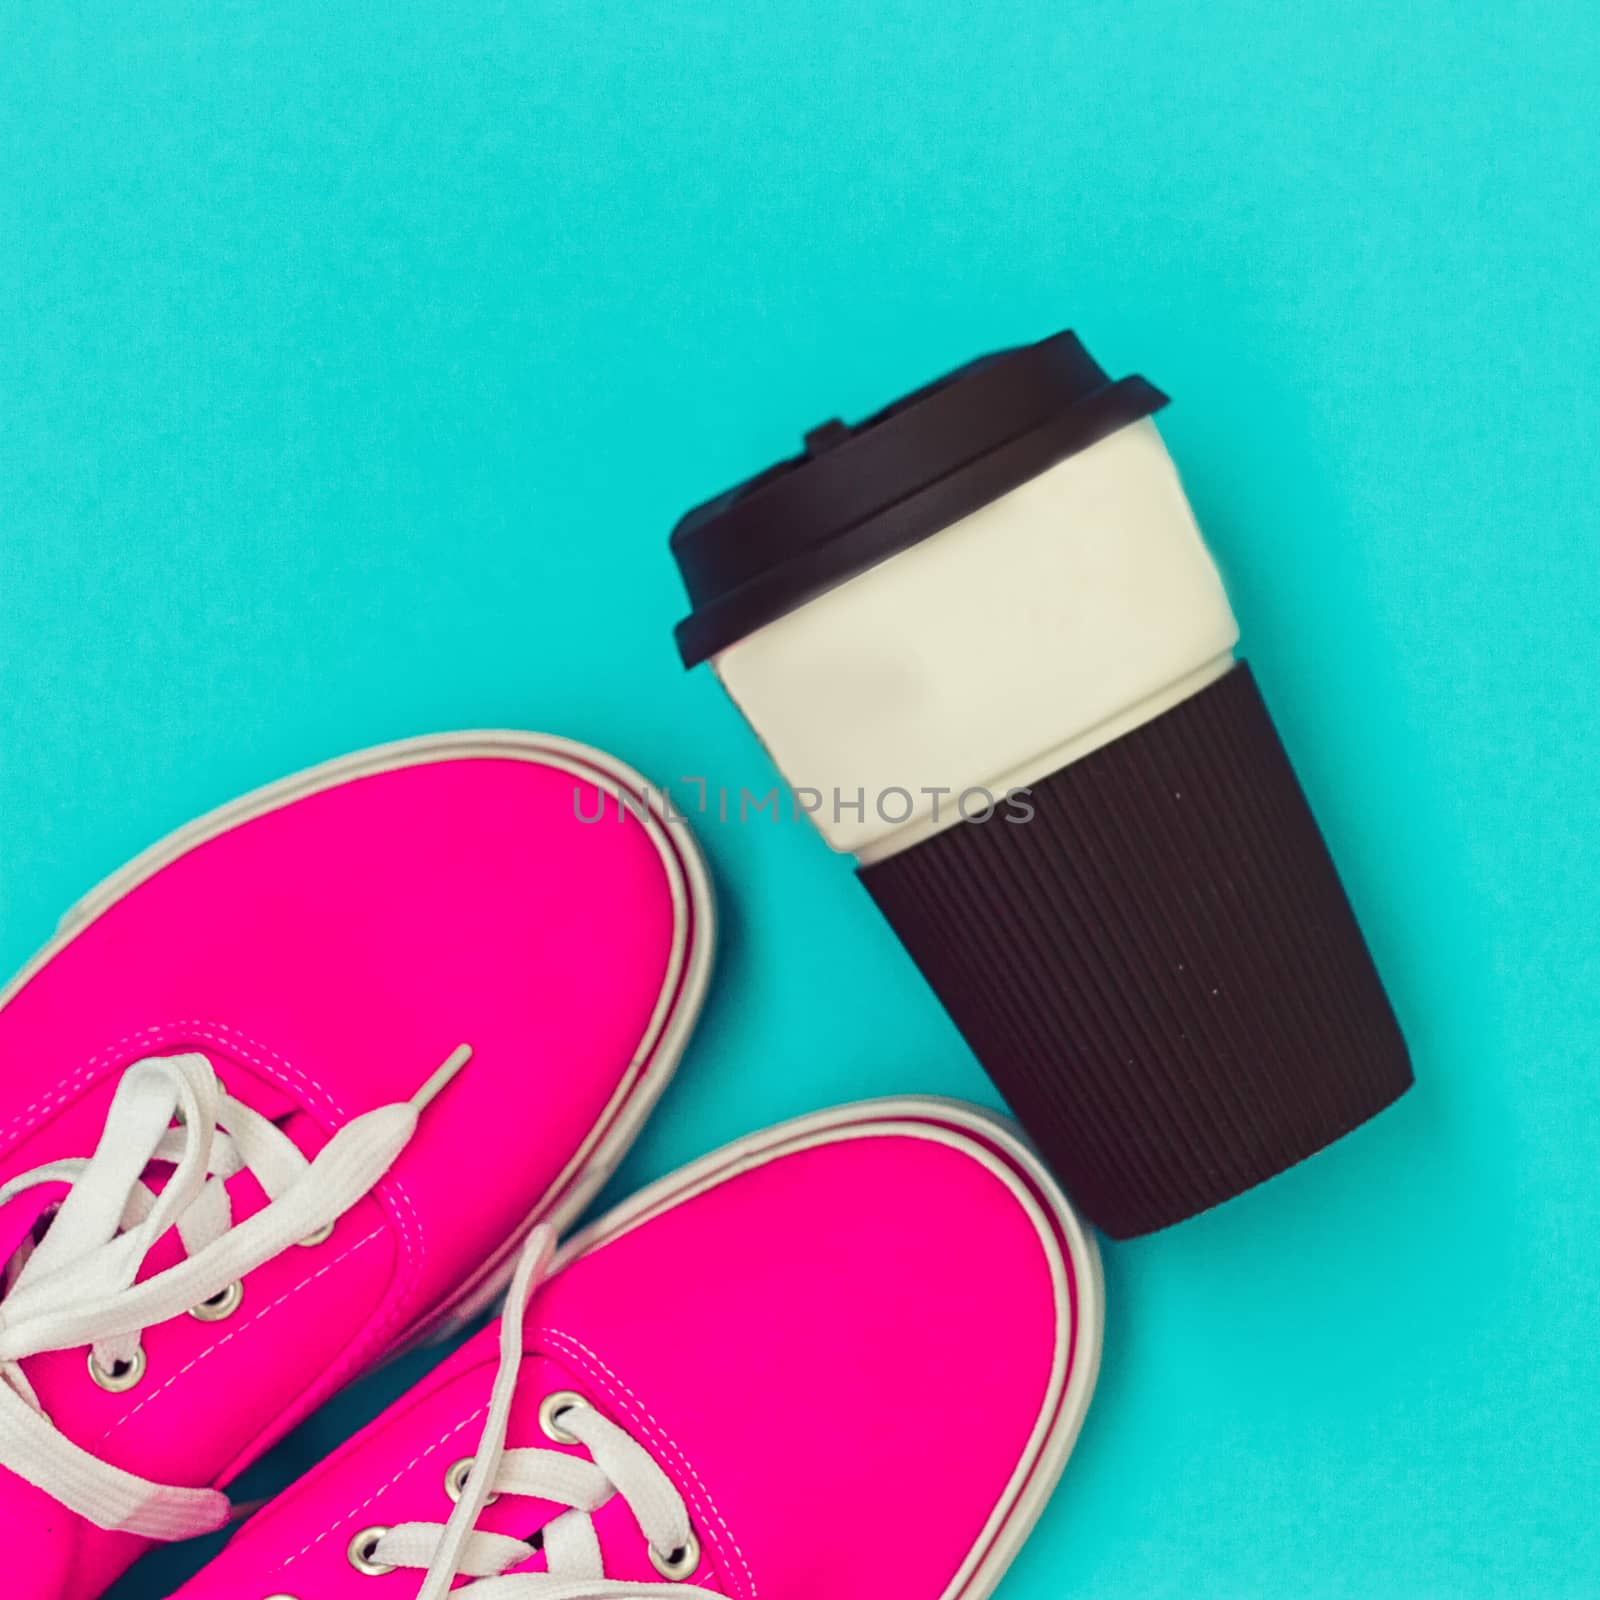 Pink sneakers and a cup on blue background by victosha